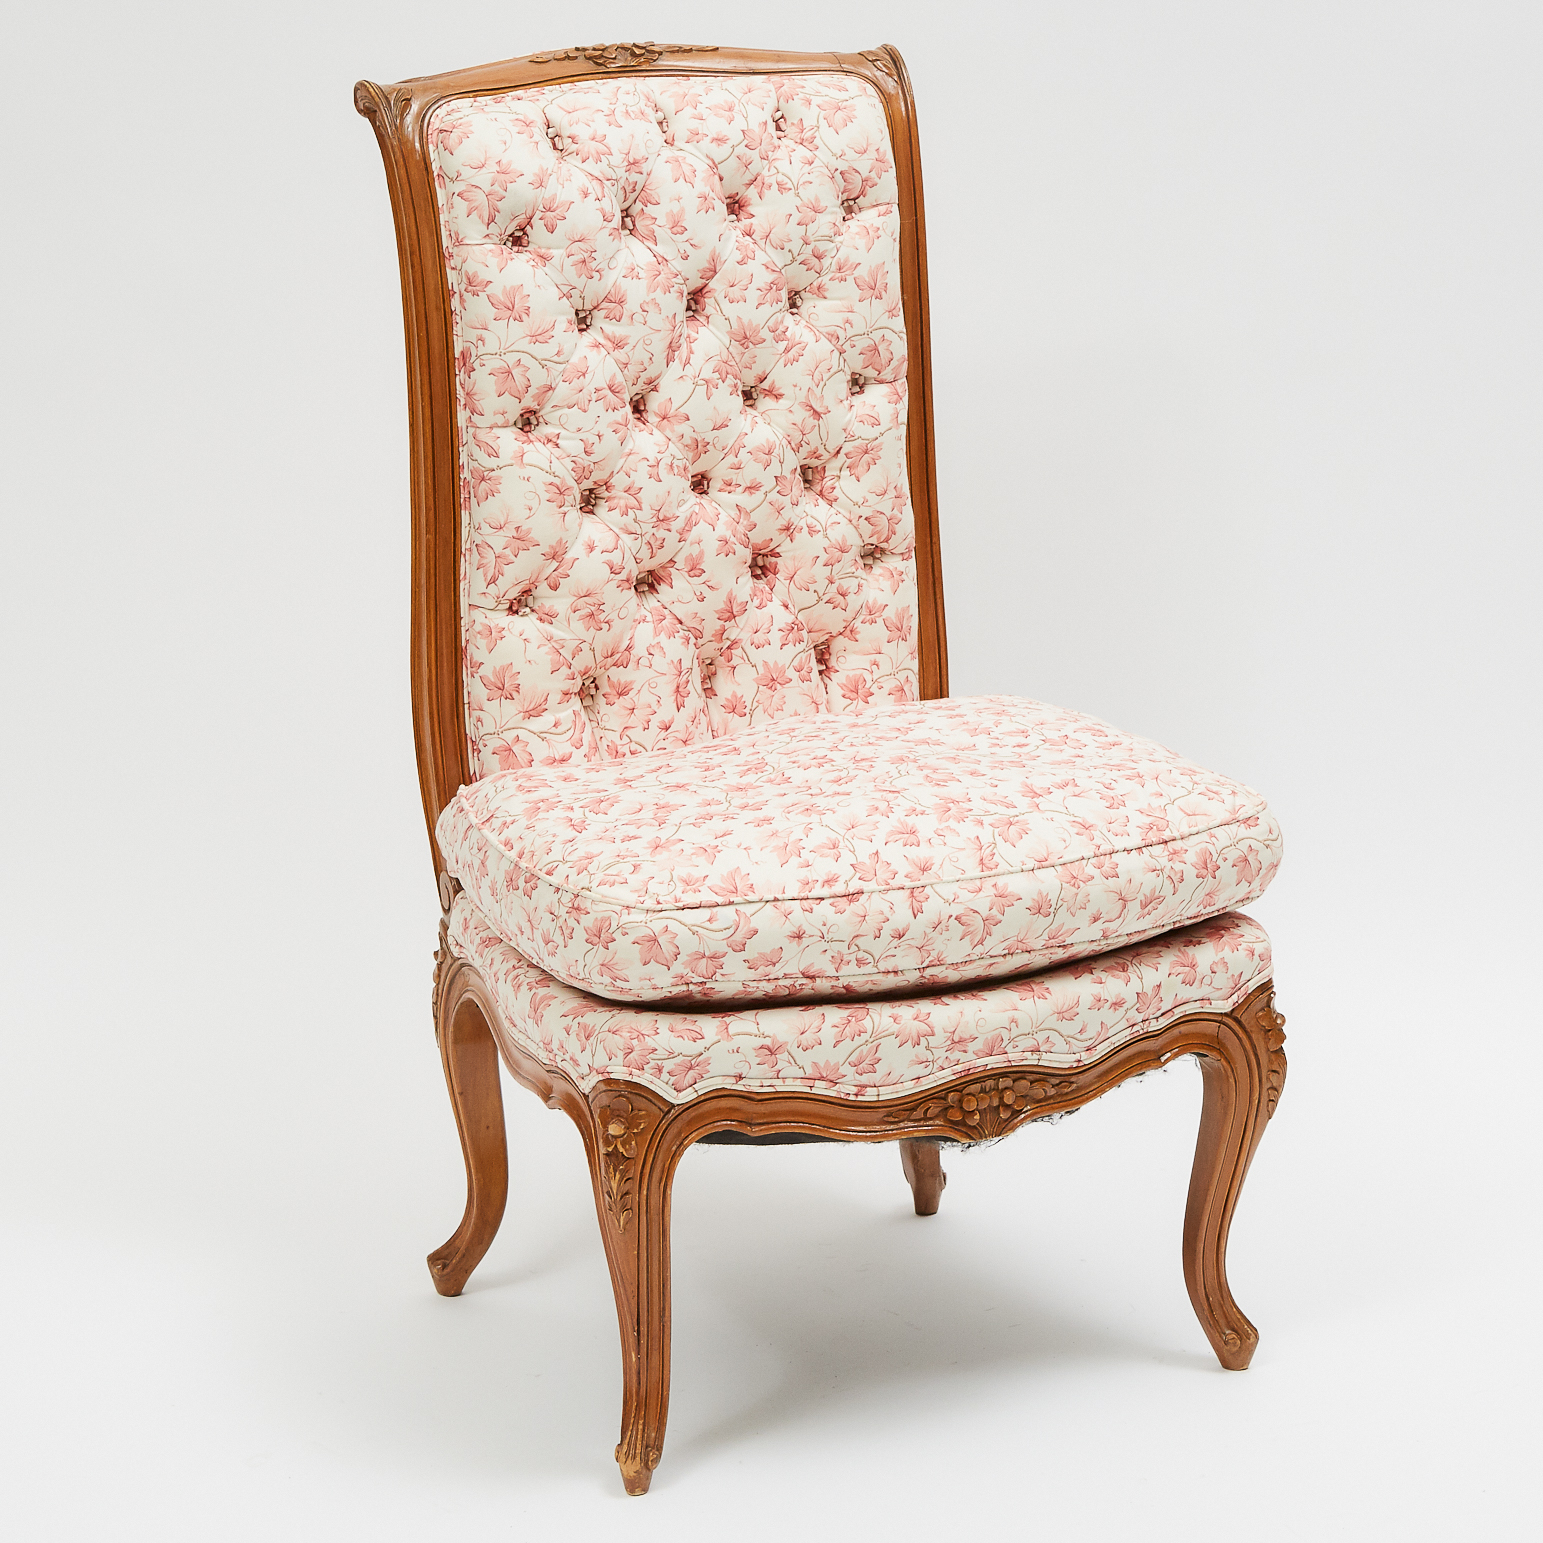 French Provincial Carved Walnut Slipper Chair, 19th/early 20th century